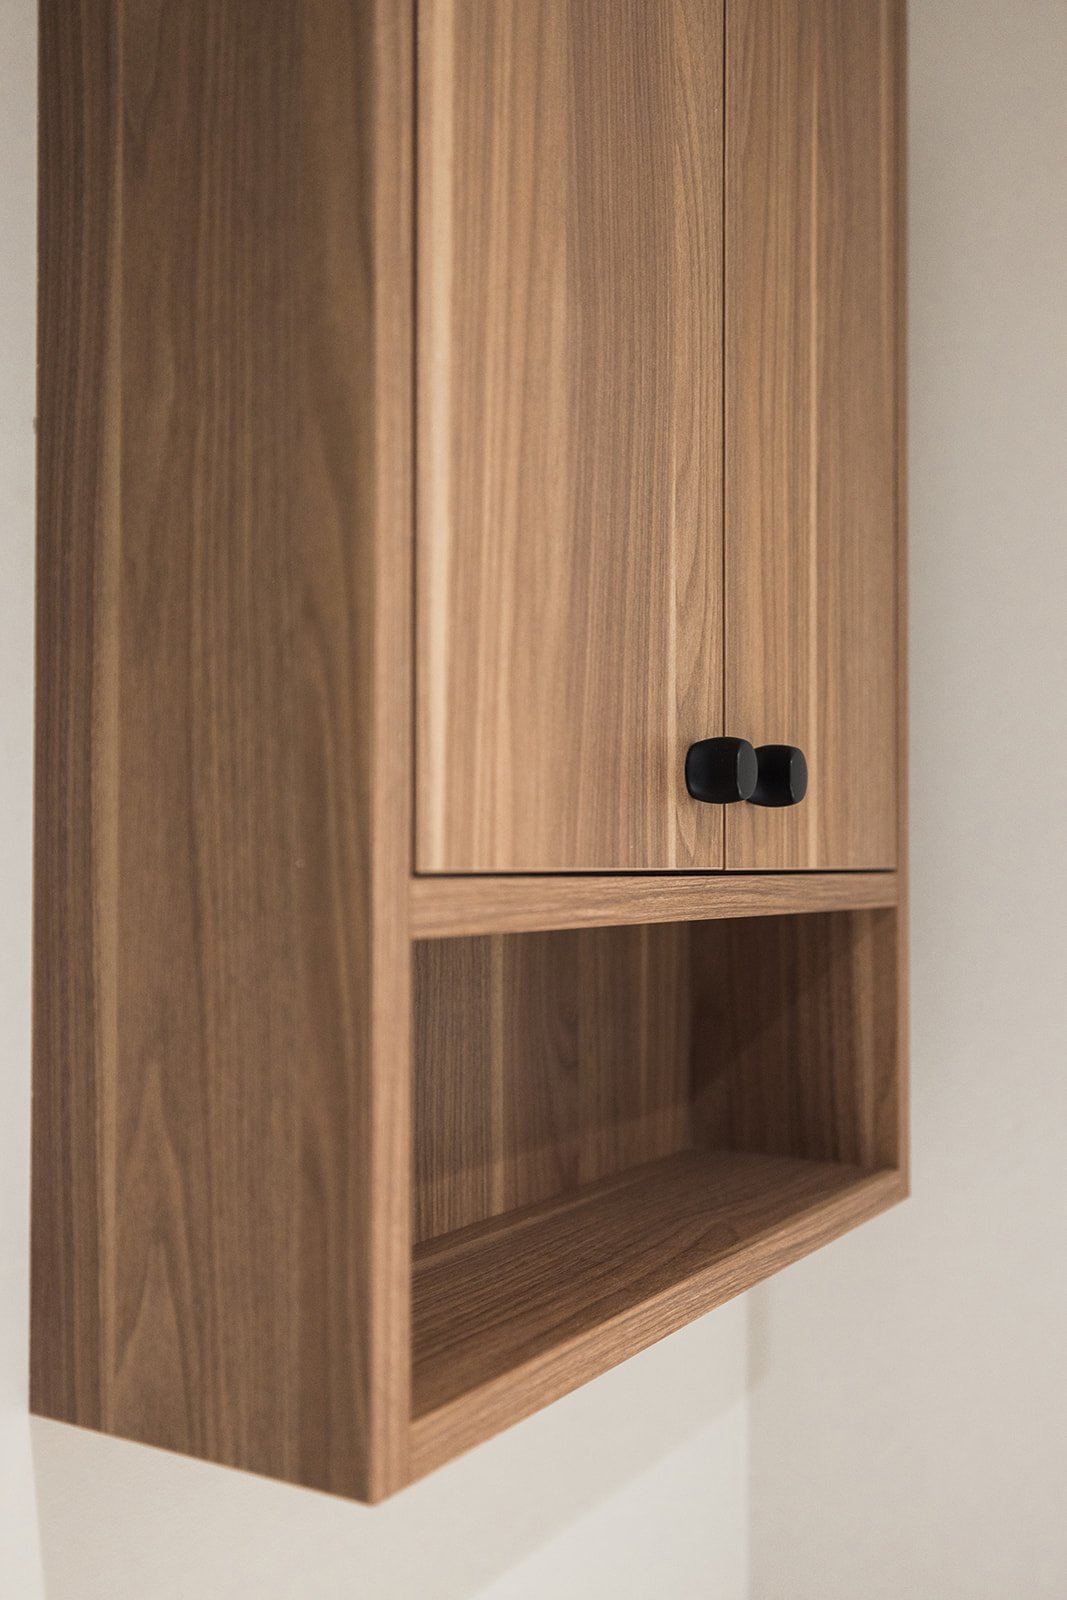 Details of wood flat-panel cabinet with black knob pulls in Toronto